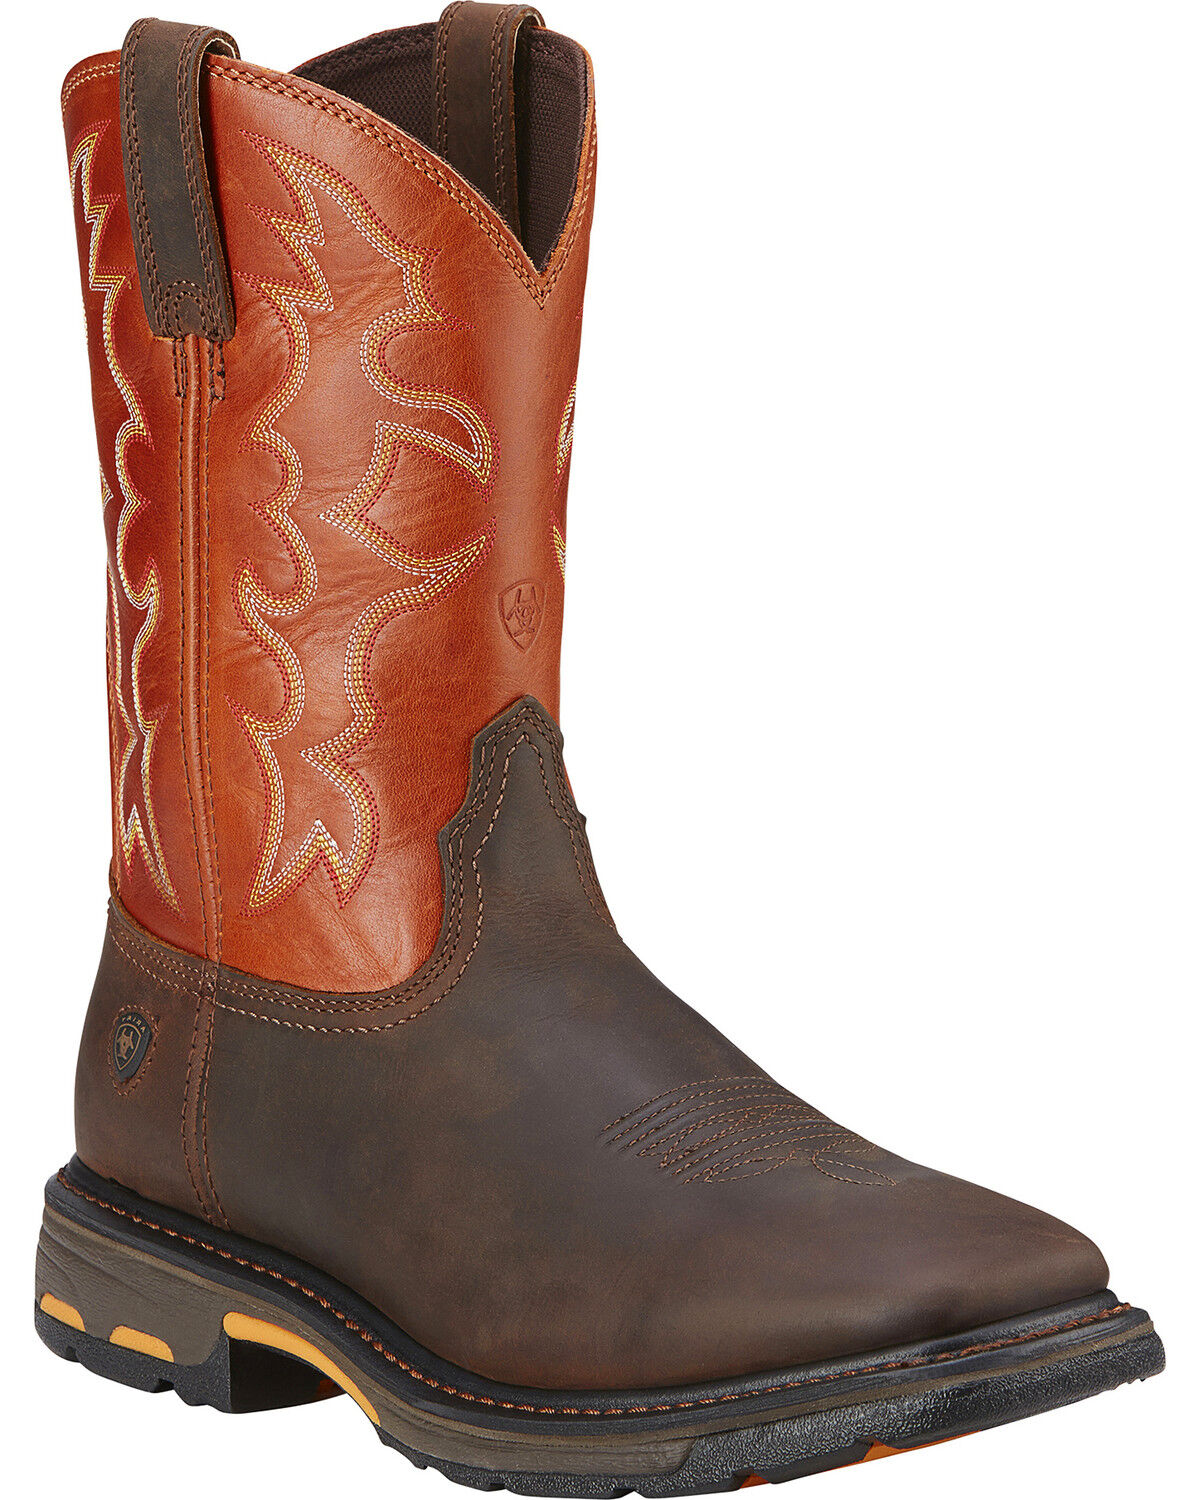 Details about   Ariat Men's Workhog Square Steel Toe Work Boots 10006961 